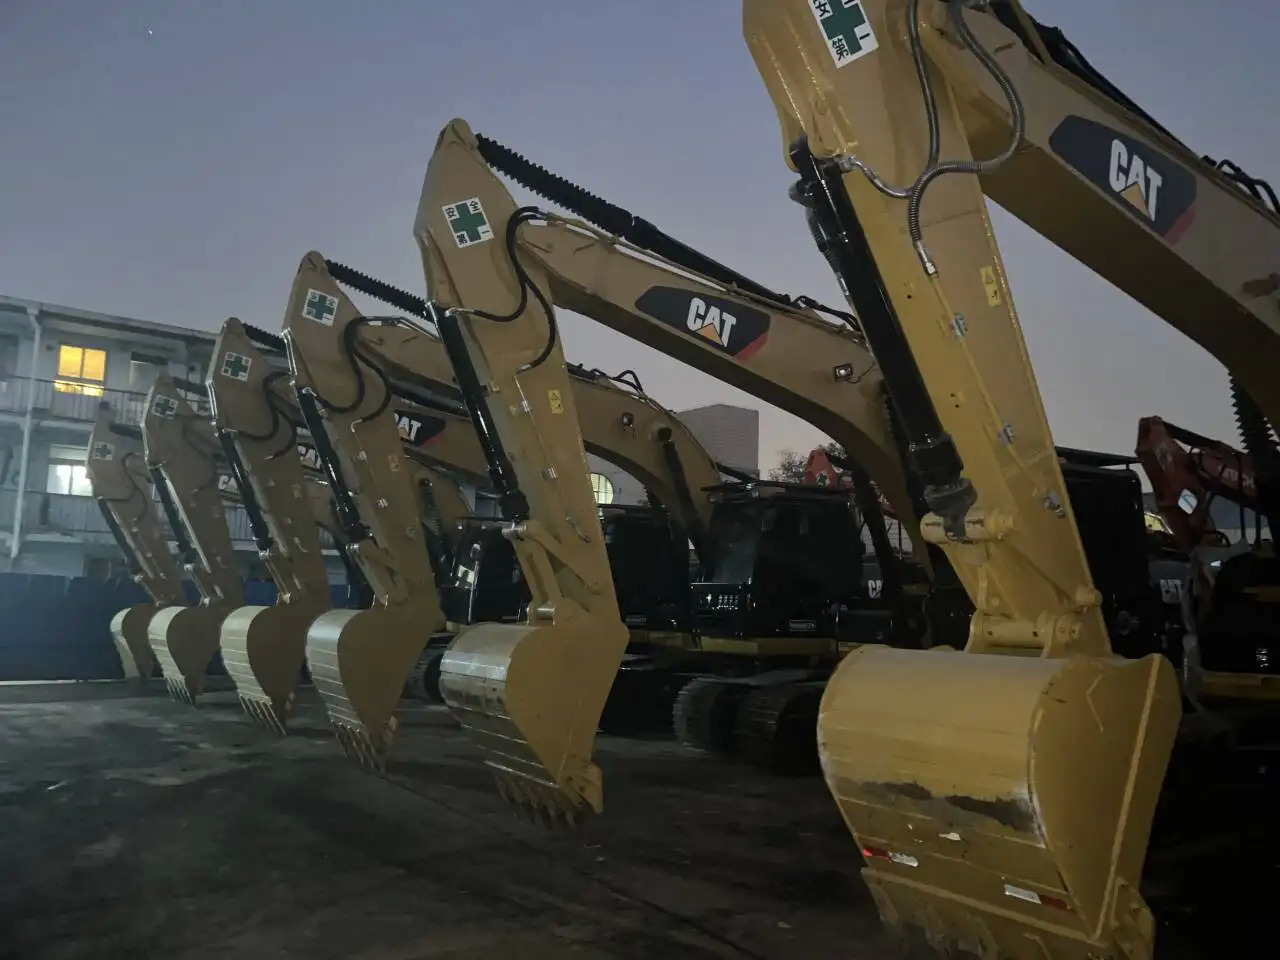 Багер гасеничар High Quality Second Hand Digger Caterpillar Used Excavators Cat 320d2,320d,320dl For Sale In Shanghai: слика 2